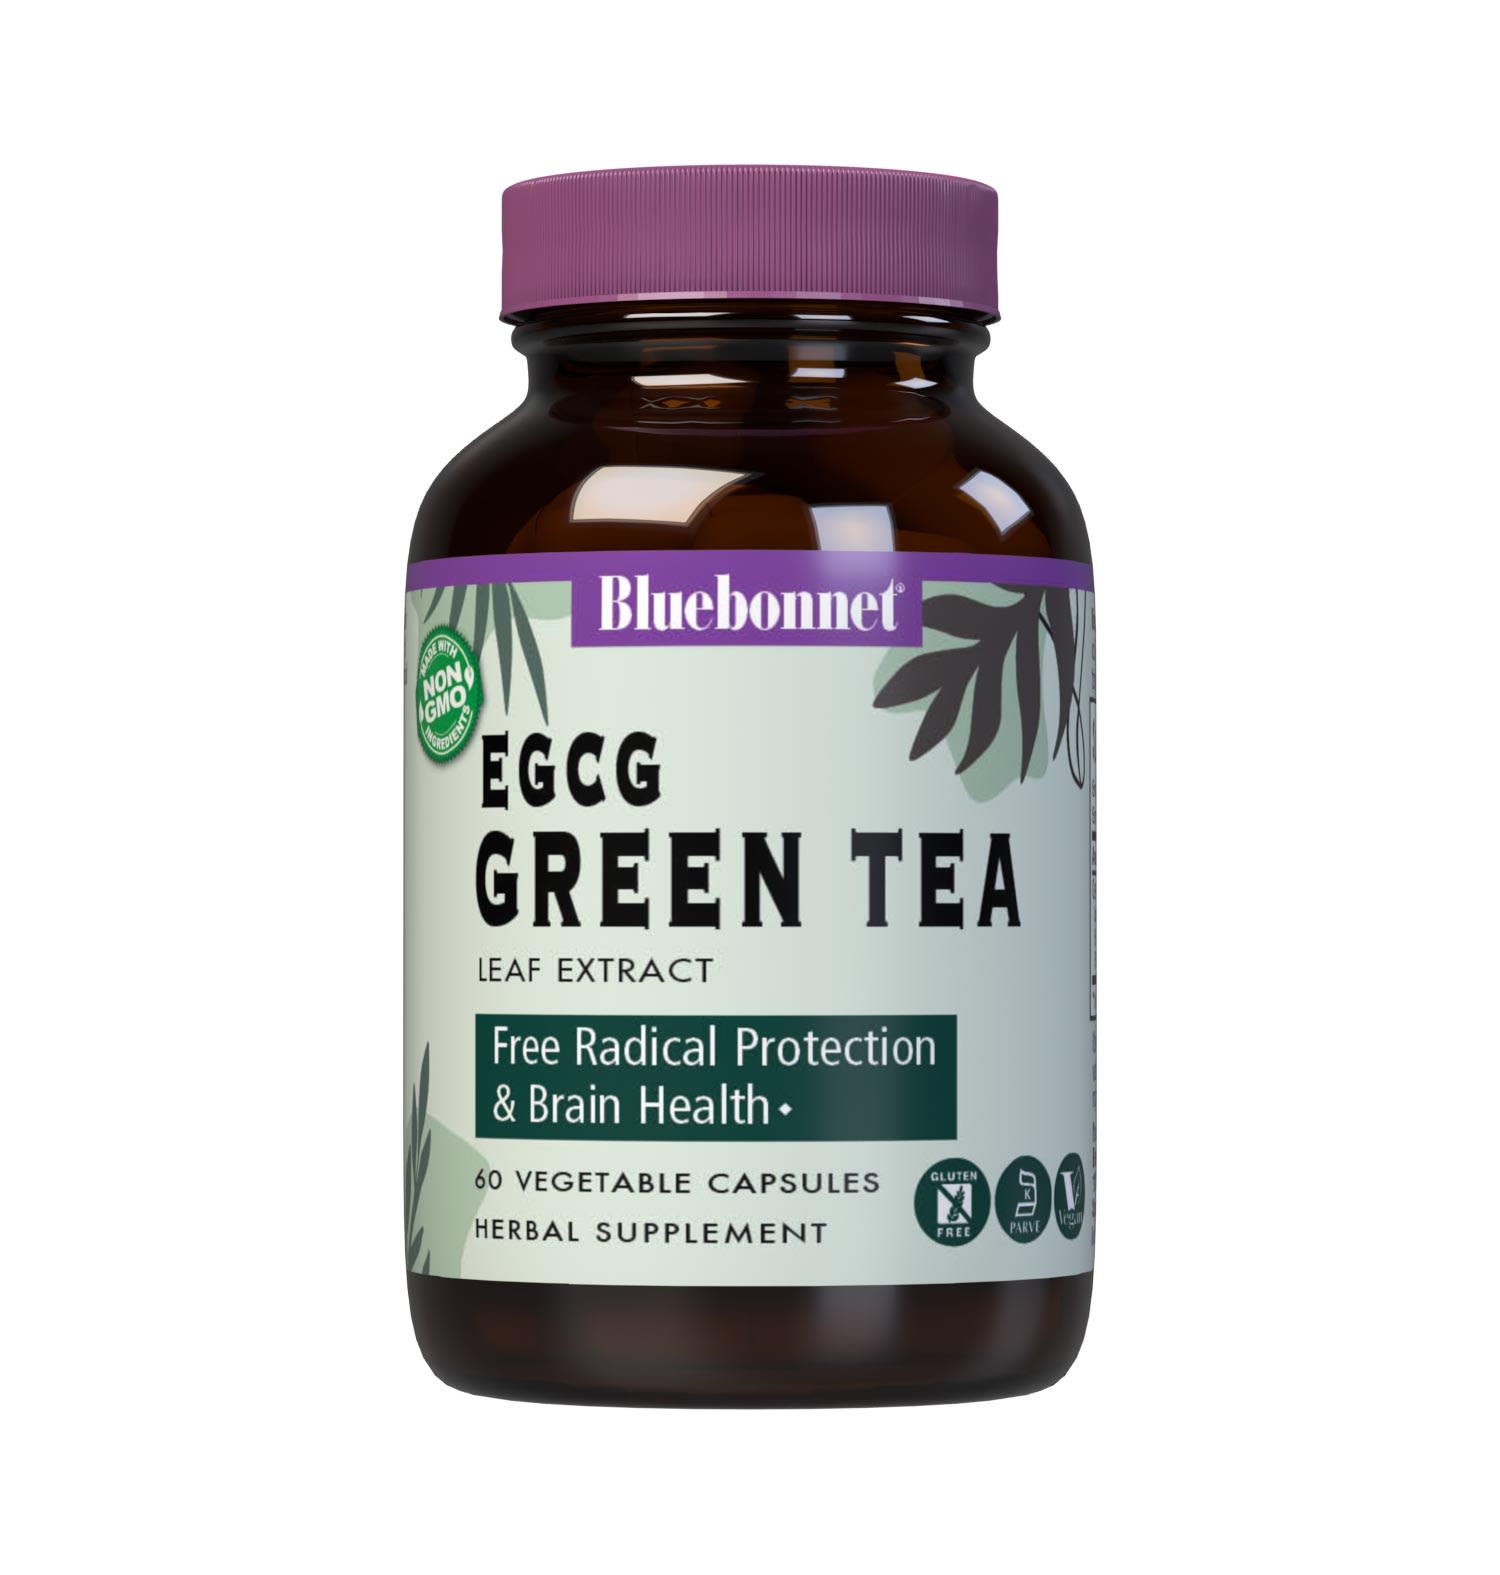 Bluebonnet’s EGCG Green Tea Leaf Extract 60 Vegetable Capsules contain a standardized extract of total polyphenols, catechins and EGCG, the most researched active constituents found in green tea. A clean and gentle water-based extraction method is employed to capture and preserve green tea’s most valuable components. #size_60 count